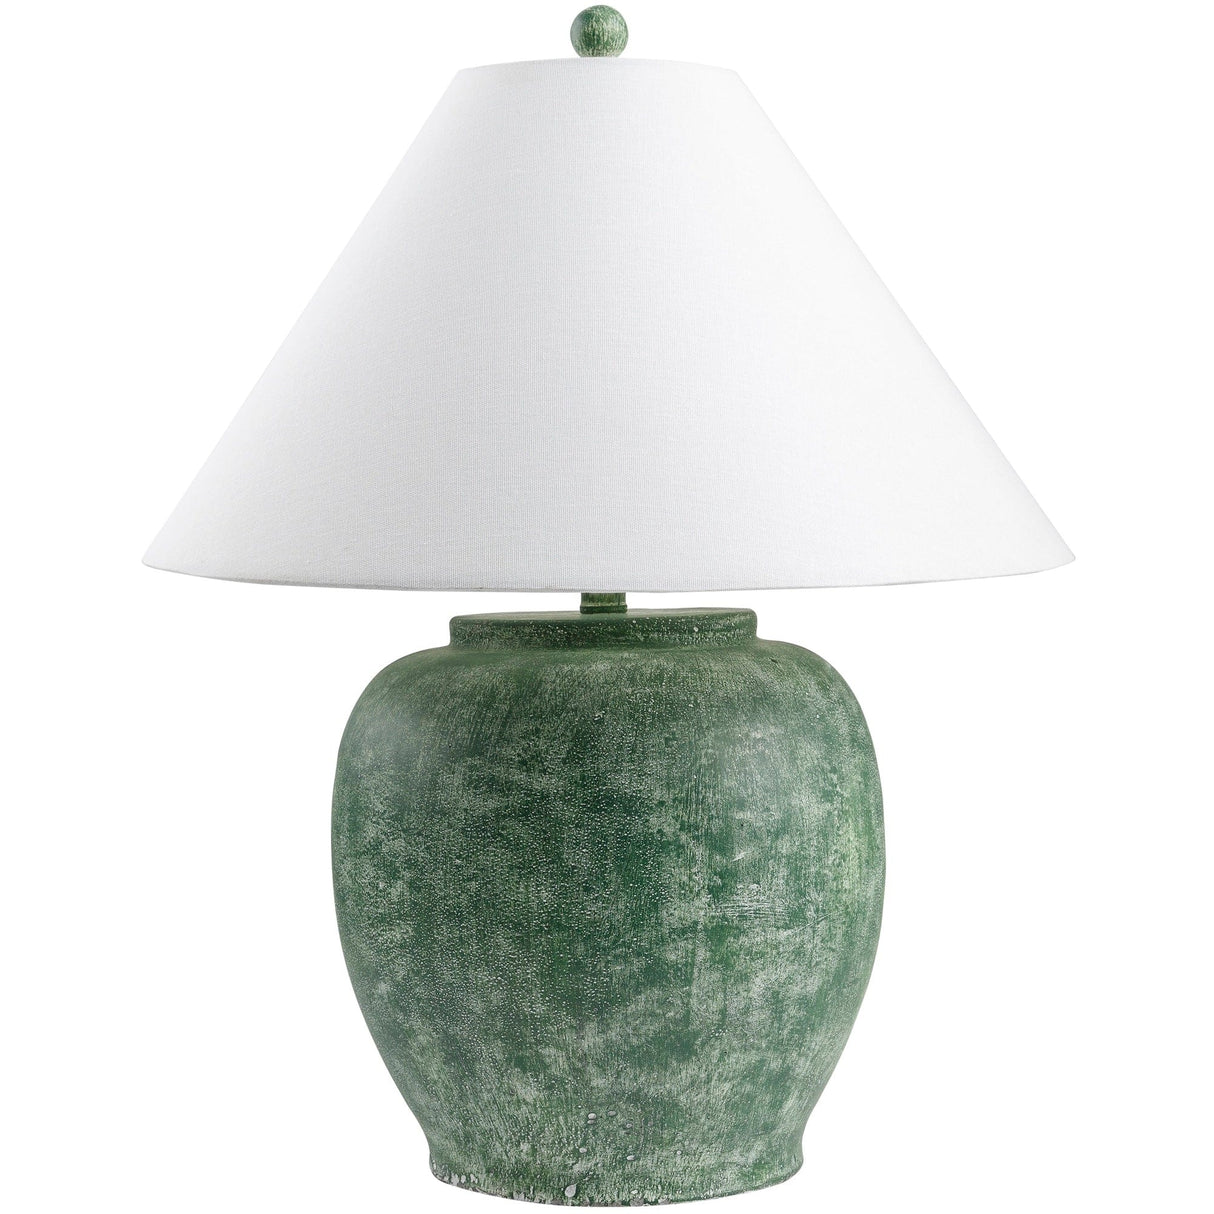 BRIGHT Forest Table Lamp Table Lamps surya-FRT-002